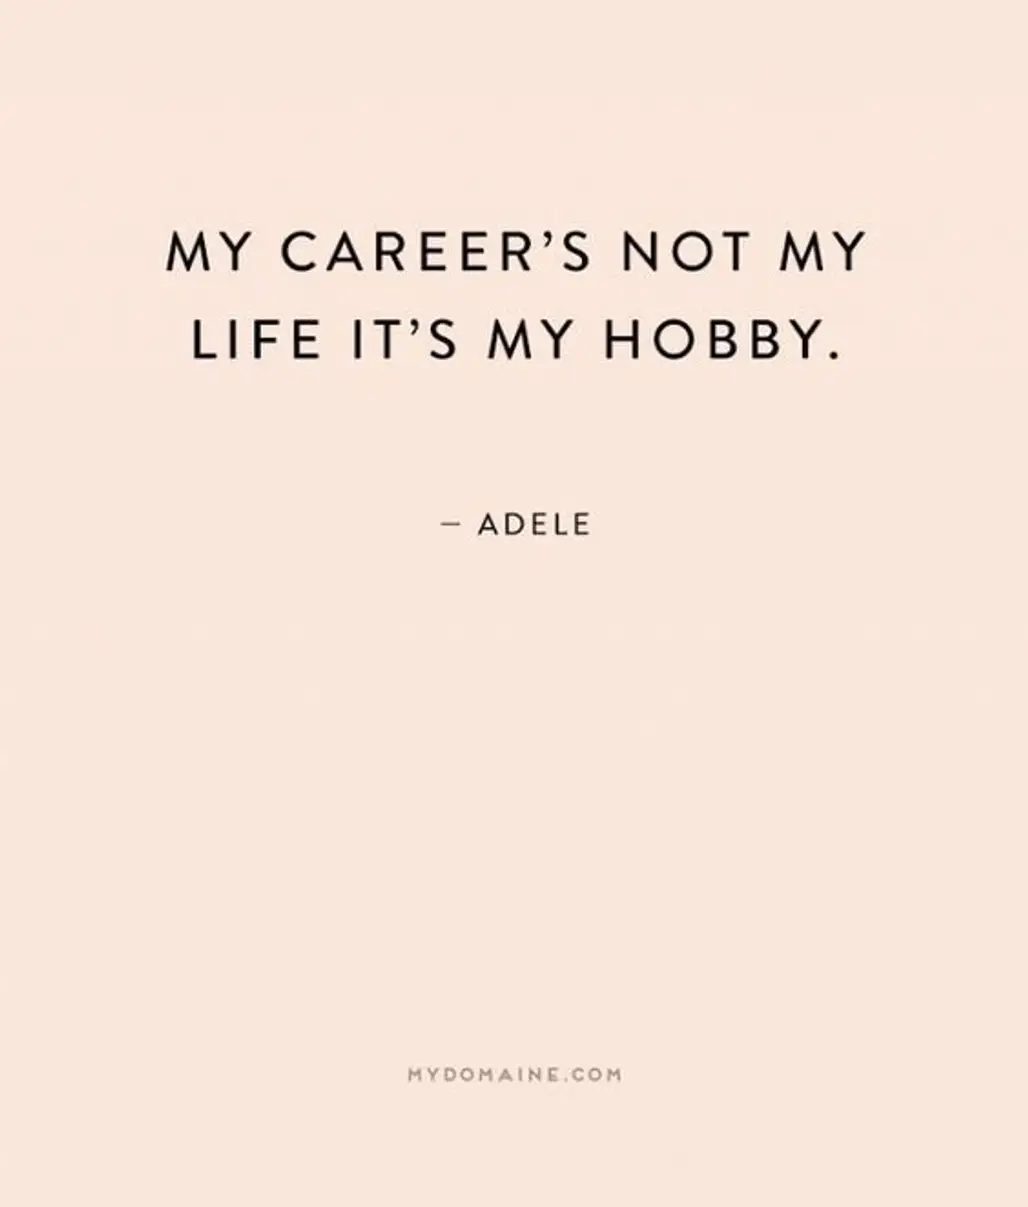 Your Career is a Hobby